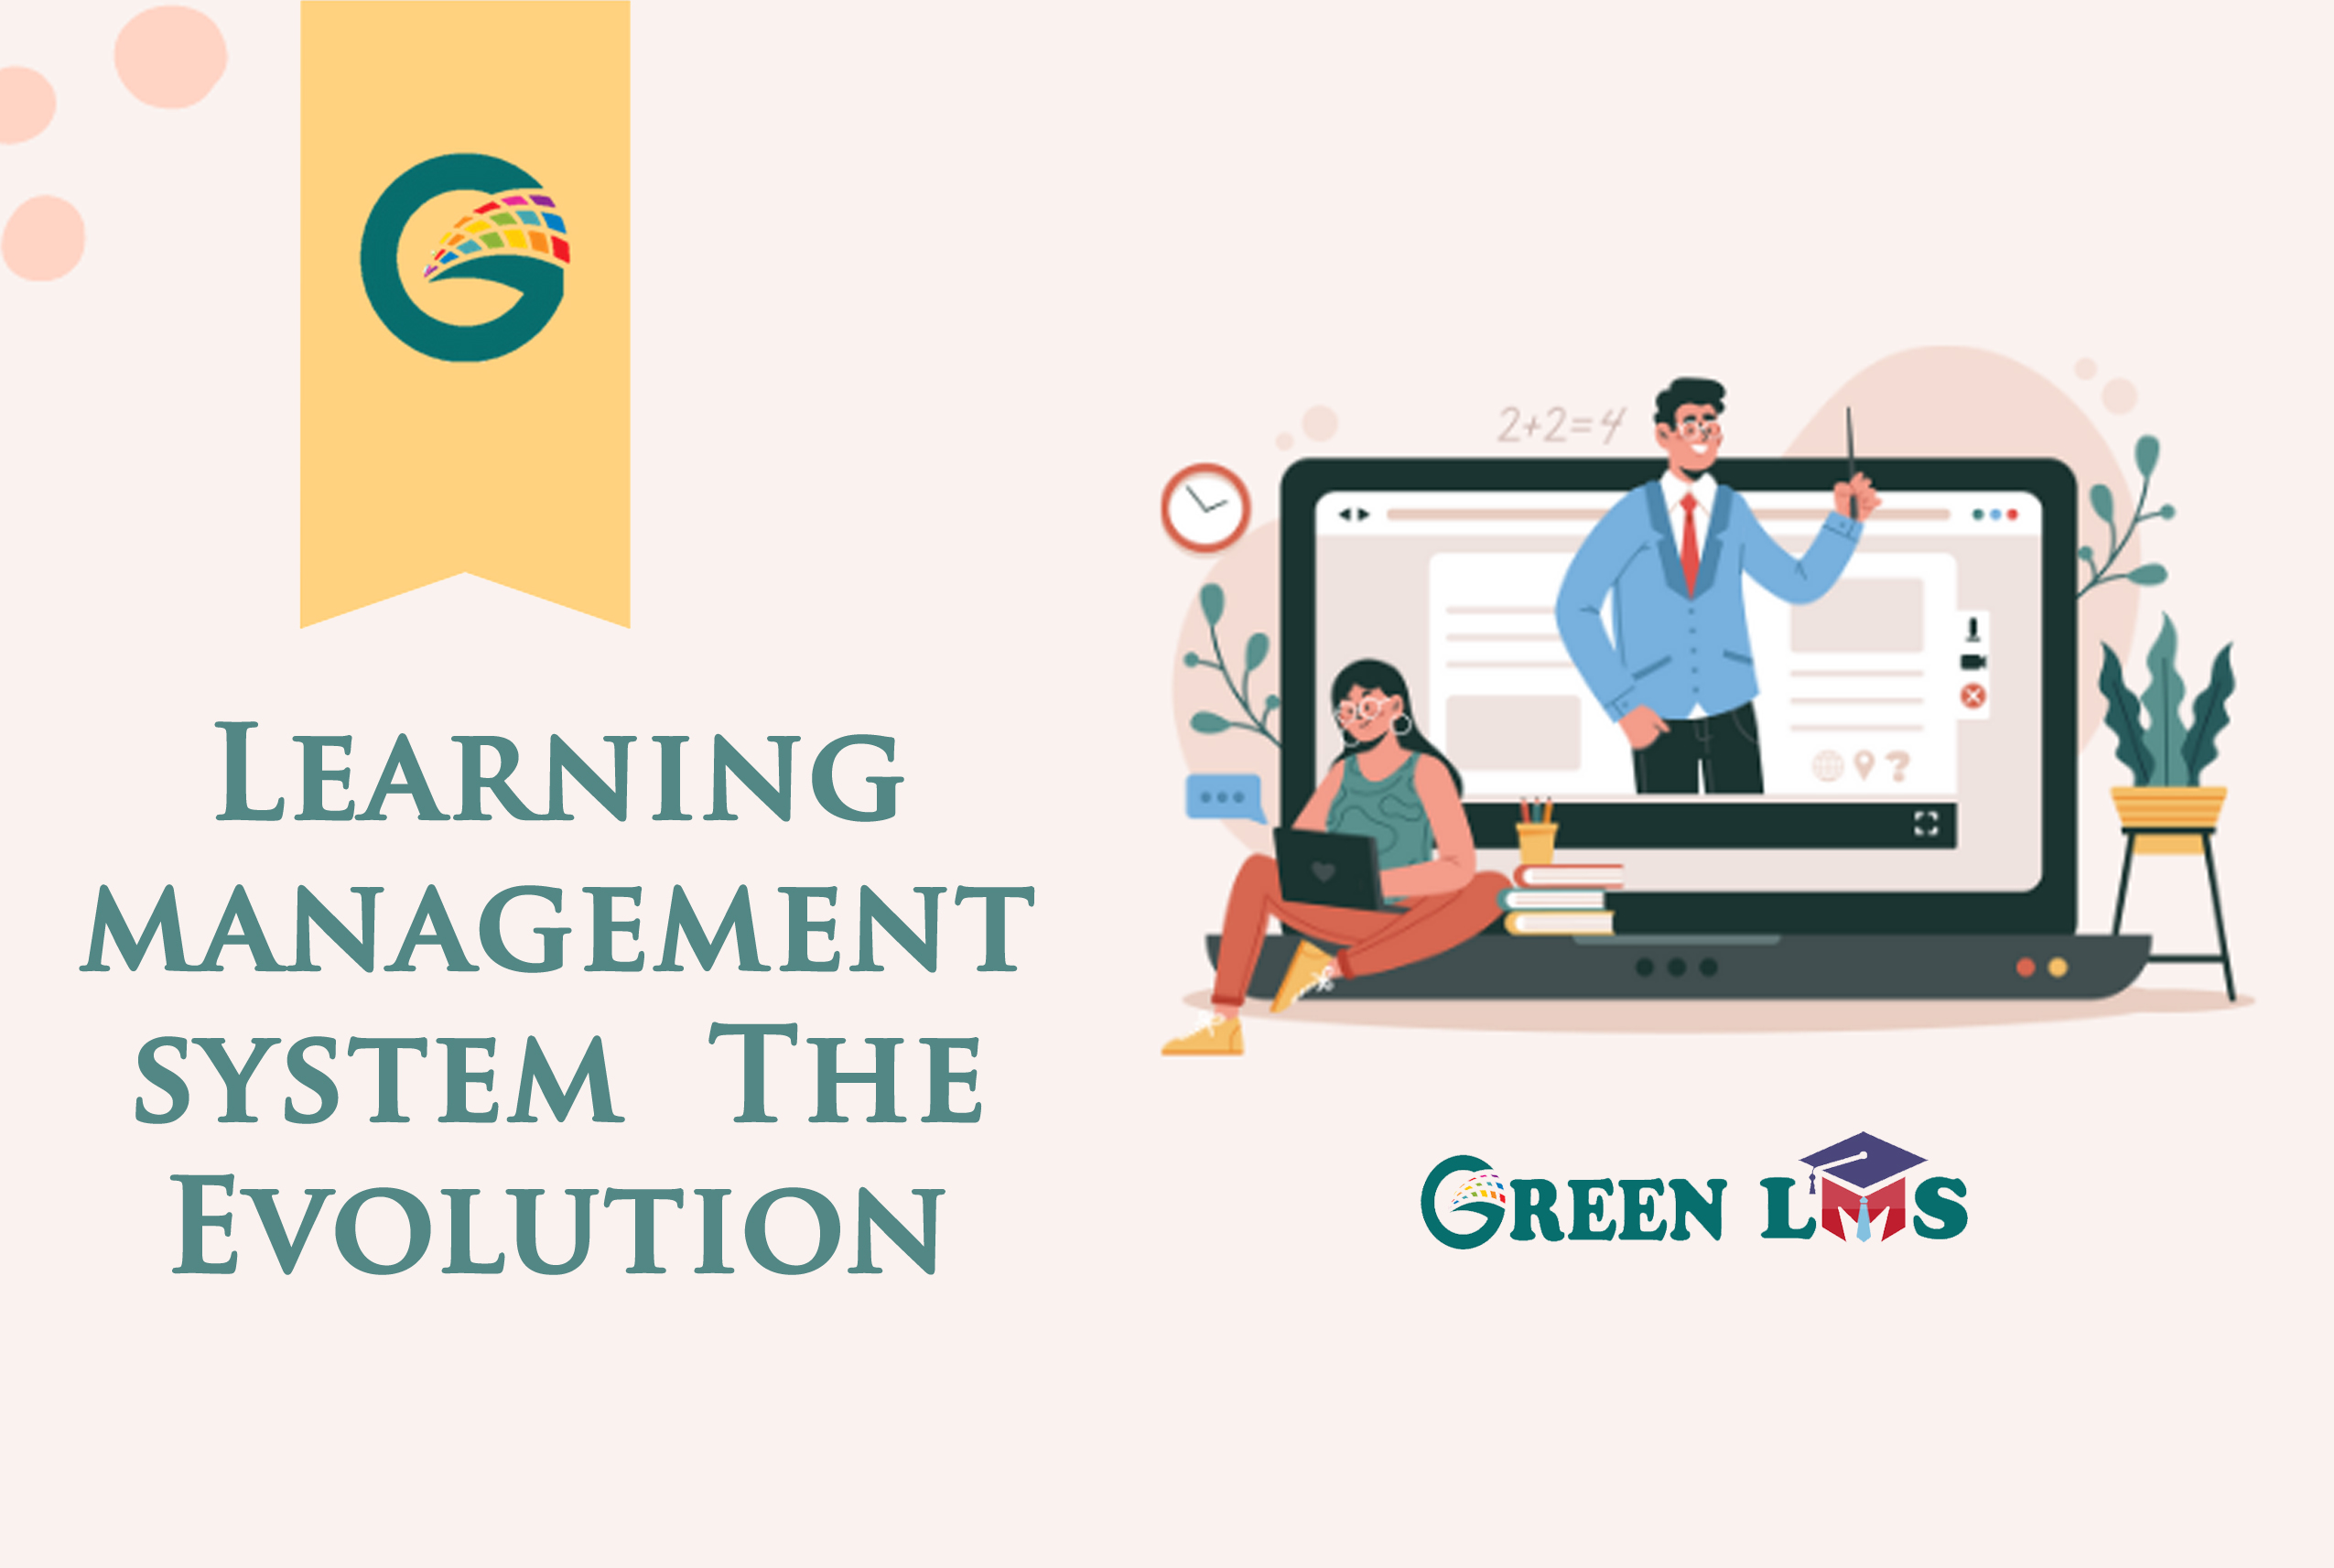 Learning management system The Evolution